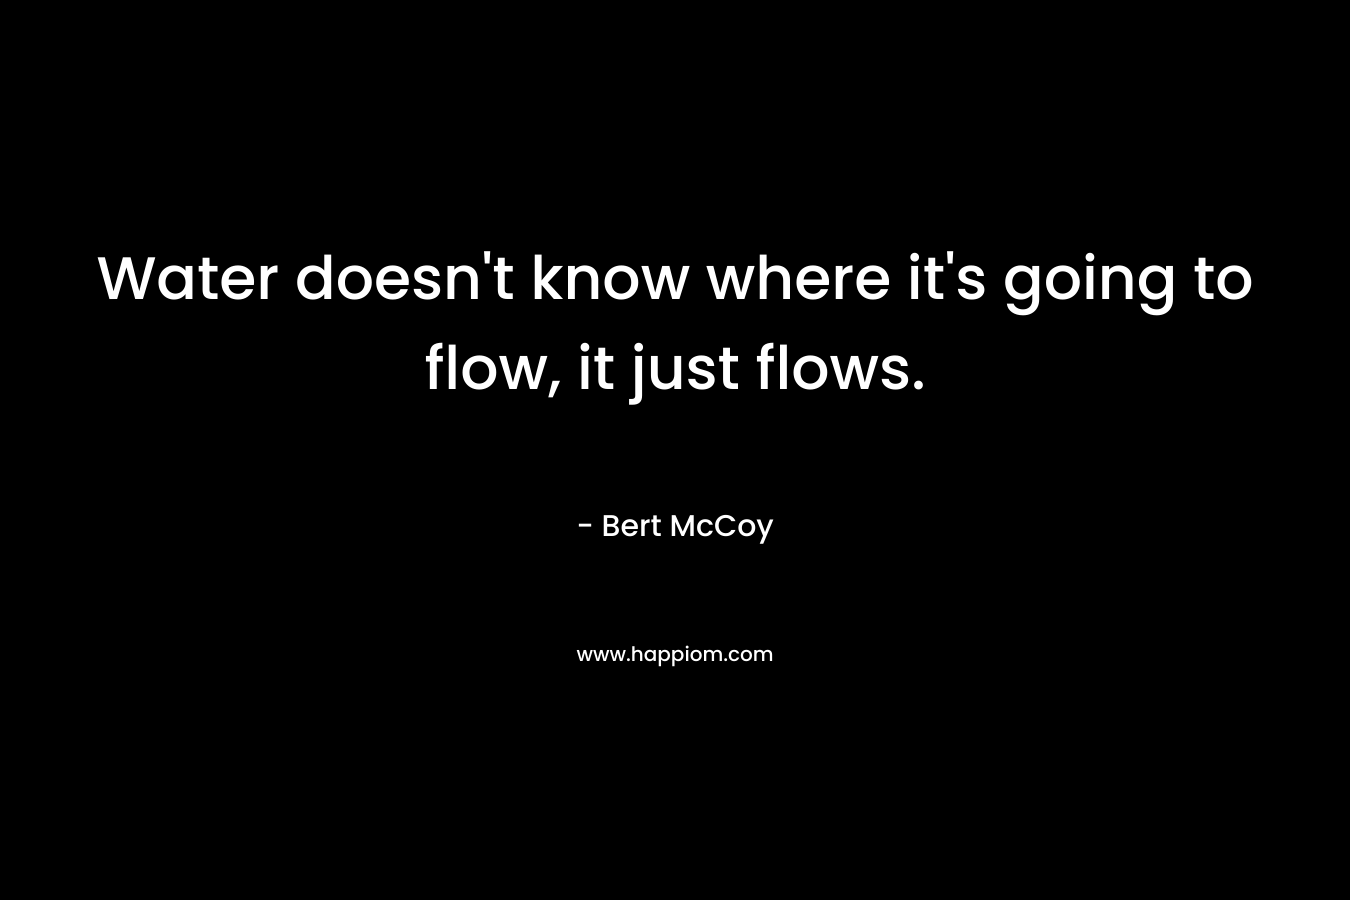 Water doesn't know where it's going to flow, it just flows.